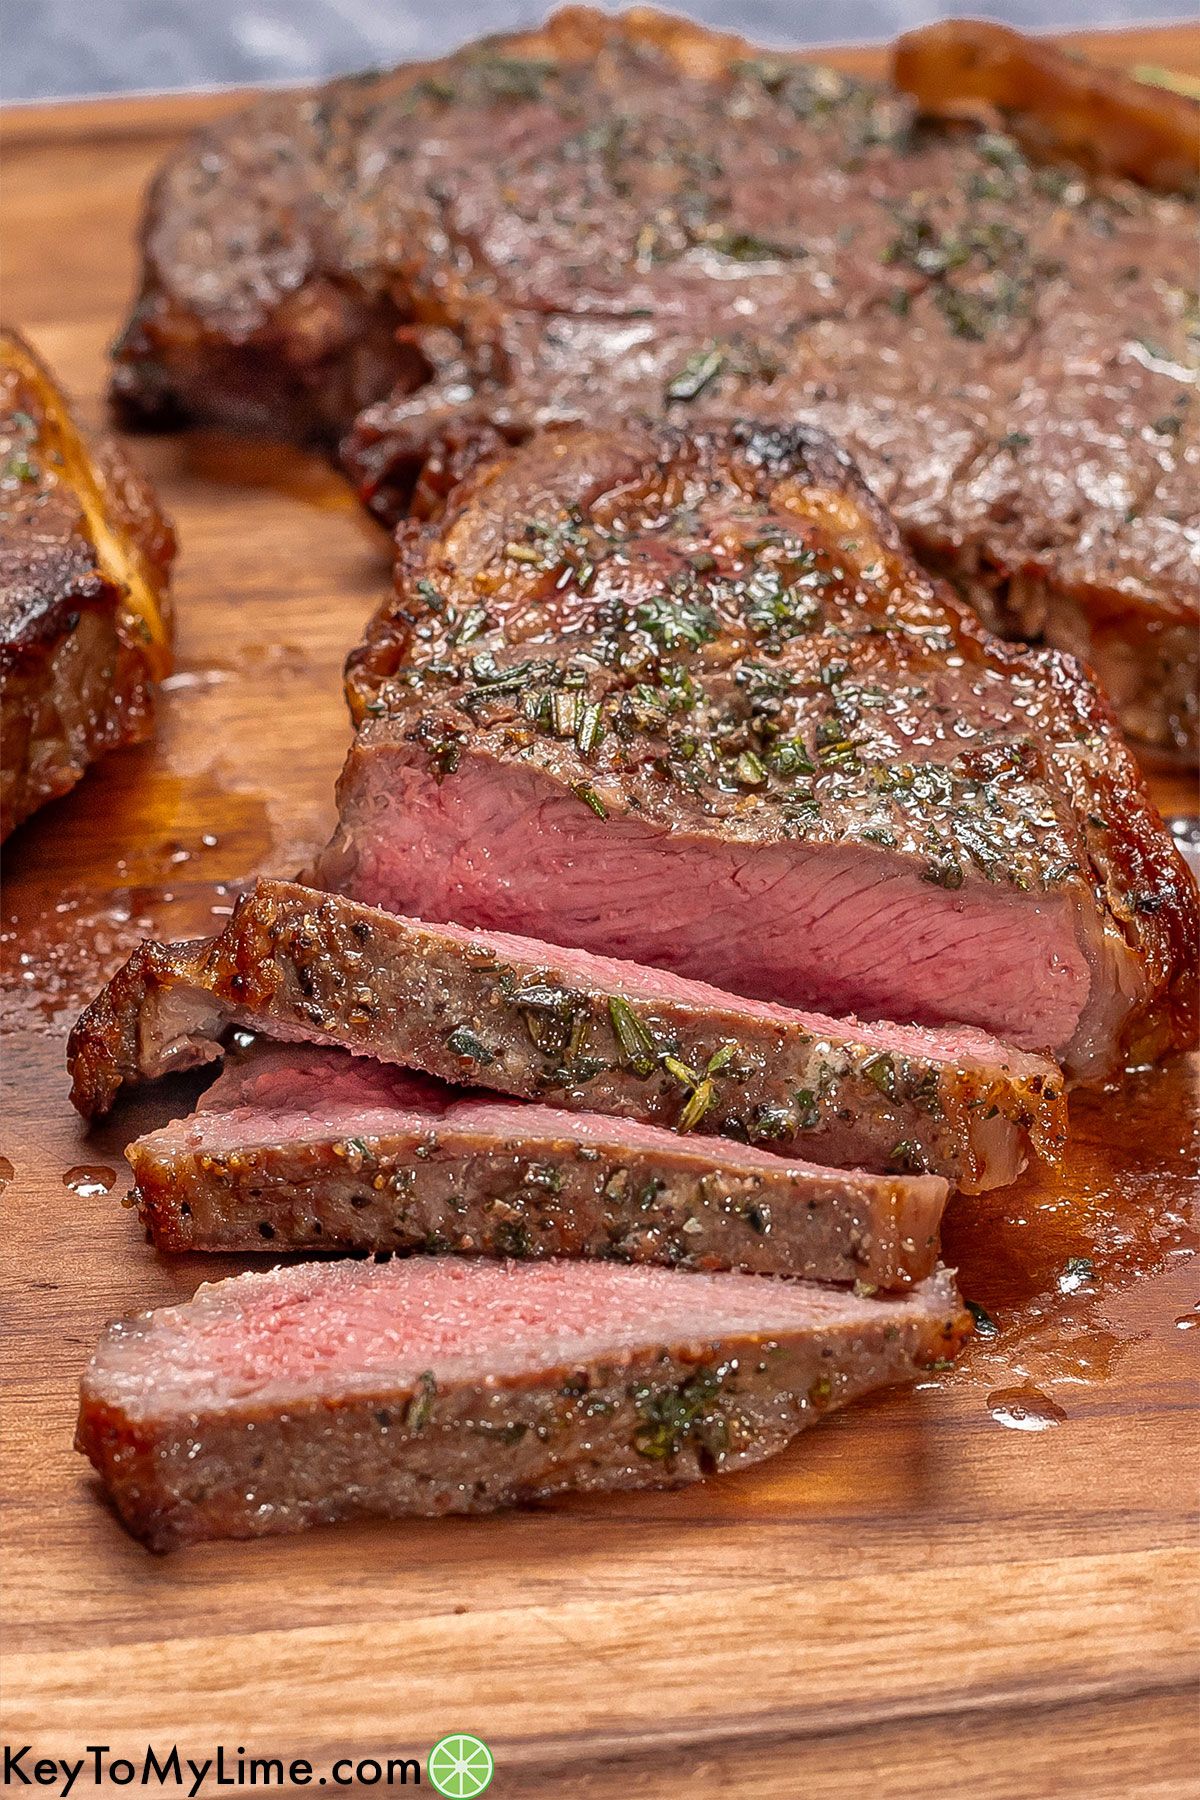 A side shot image of a sliced steak showing the inside texture.